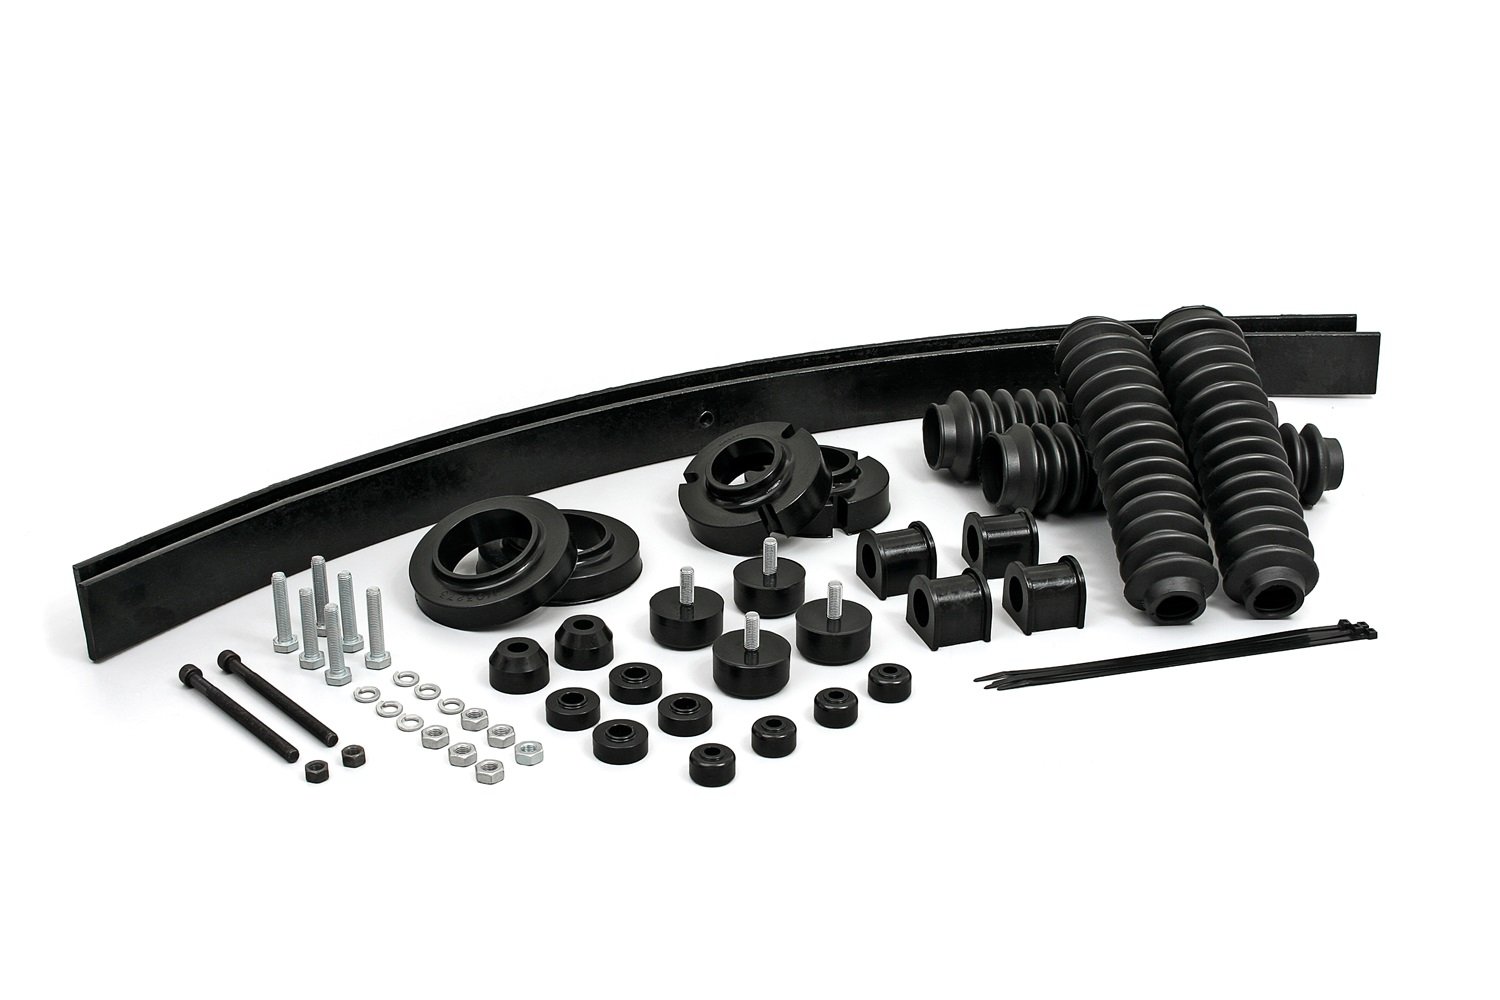 95-04 TACOMA 2/4WD 2-1/2IN LIFT KIT W/ ADD-A-LEAF INCL SWAY BAR BUSHINGS 6 LUG ONLY